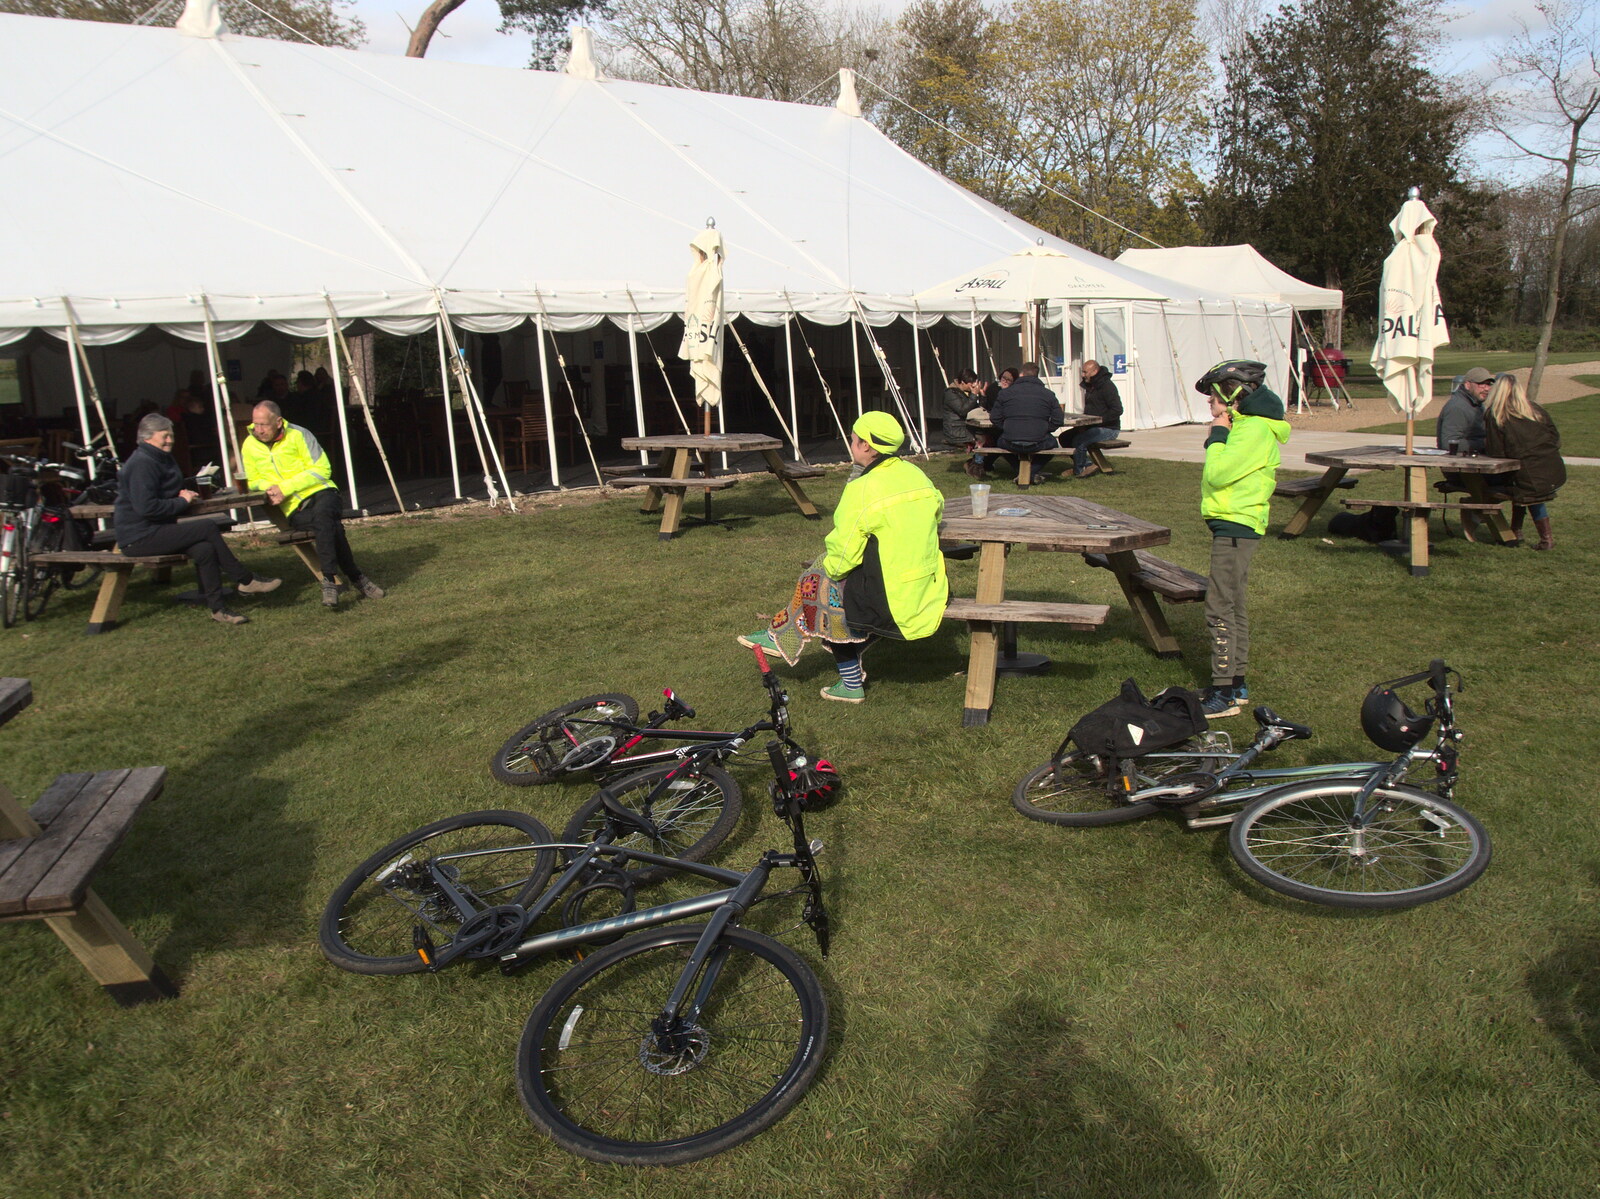 Our pile of bikes from BSCC Beer Garden Hypothermia, Hoxne and Brome, Suffolk - 22nd April 2021